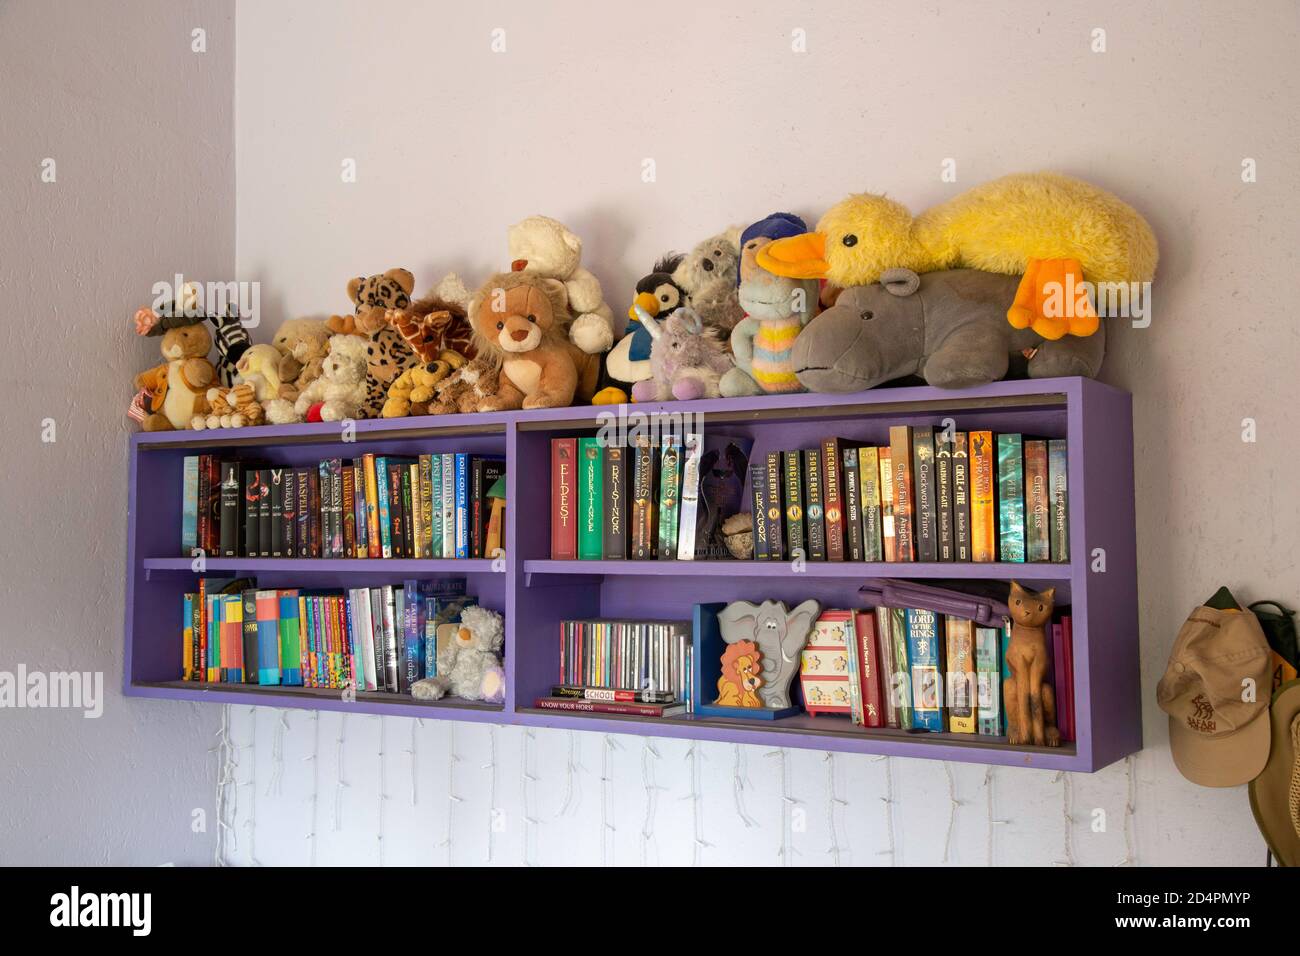 Shelf with books and soft fluffy toys in a children's bedroom Stock Photo